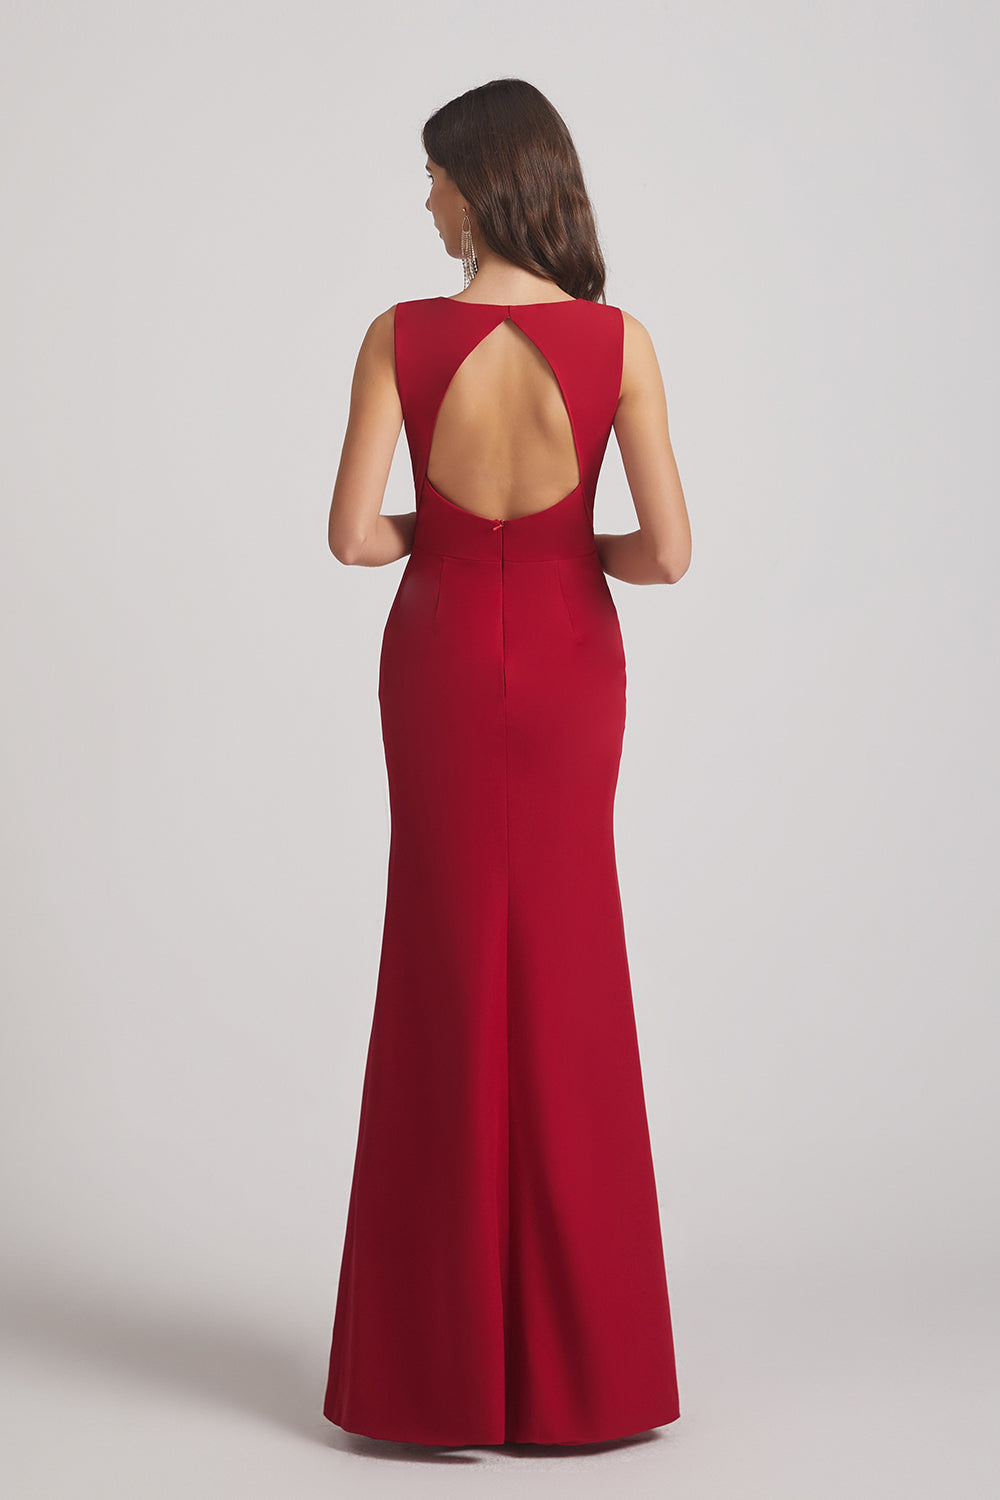 Bridesmaid Dresses With Open Back